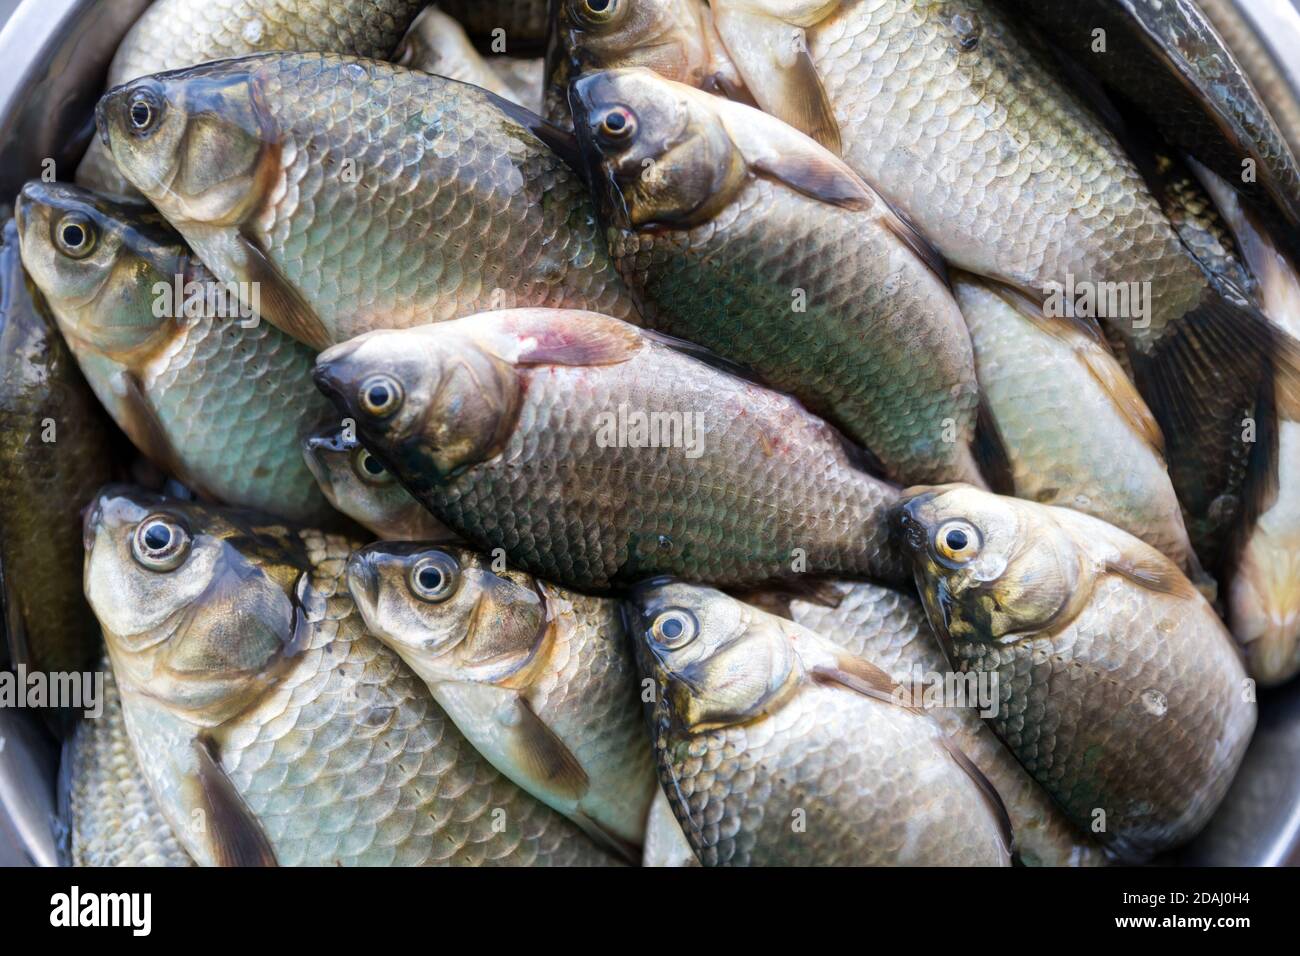 https://c8.alamy.com/comp/2DAJ0H4/fresh-washed-brilliant-small-lake-fish-roach-lies-in-large-numbers-in-the-plate-2DAJ0H4.jpg